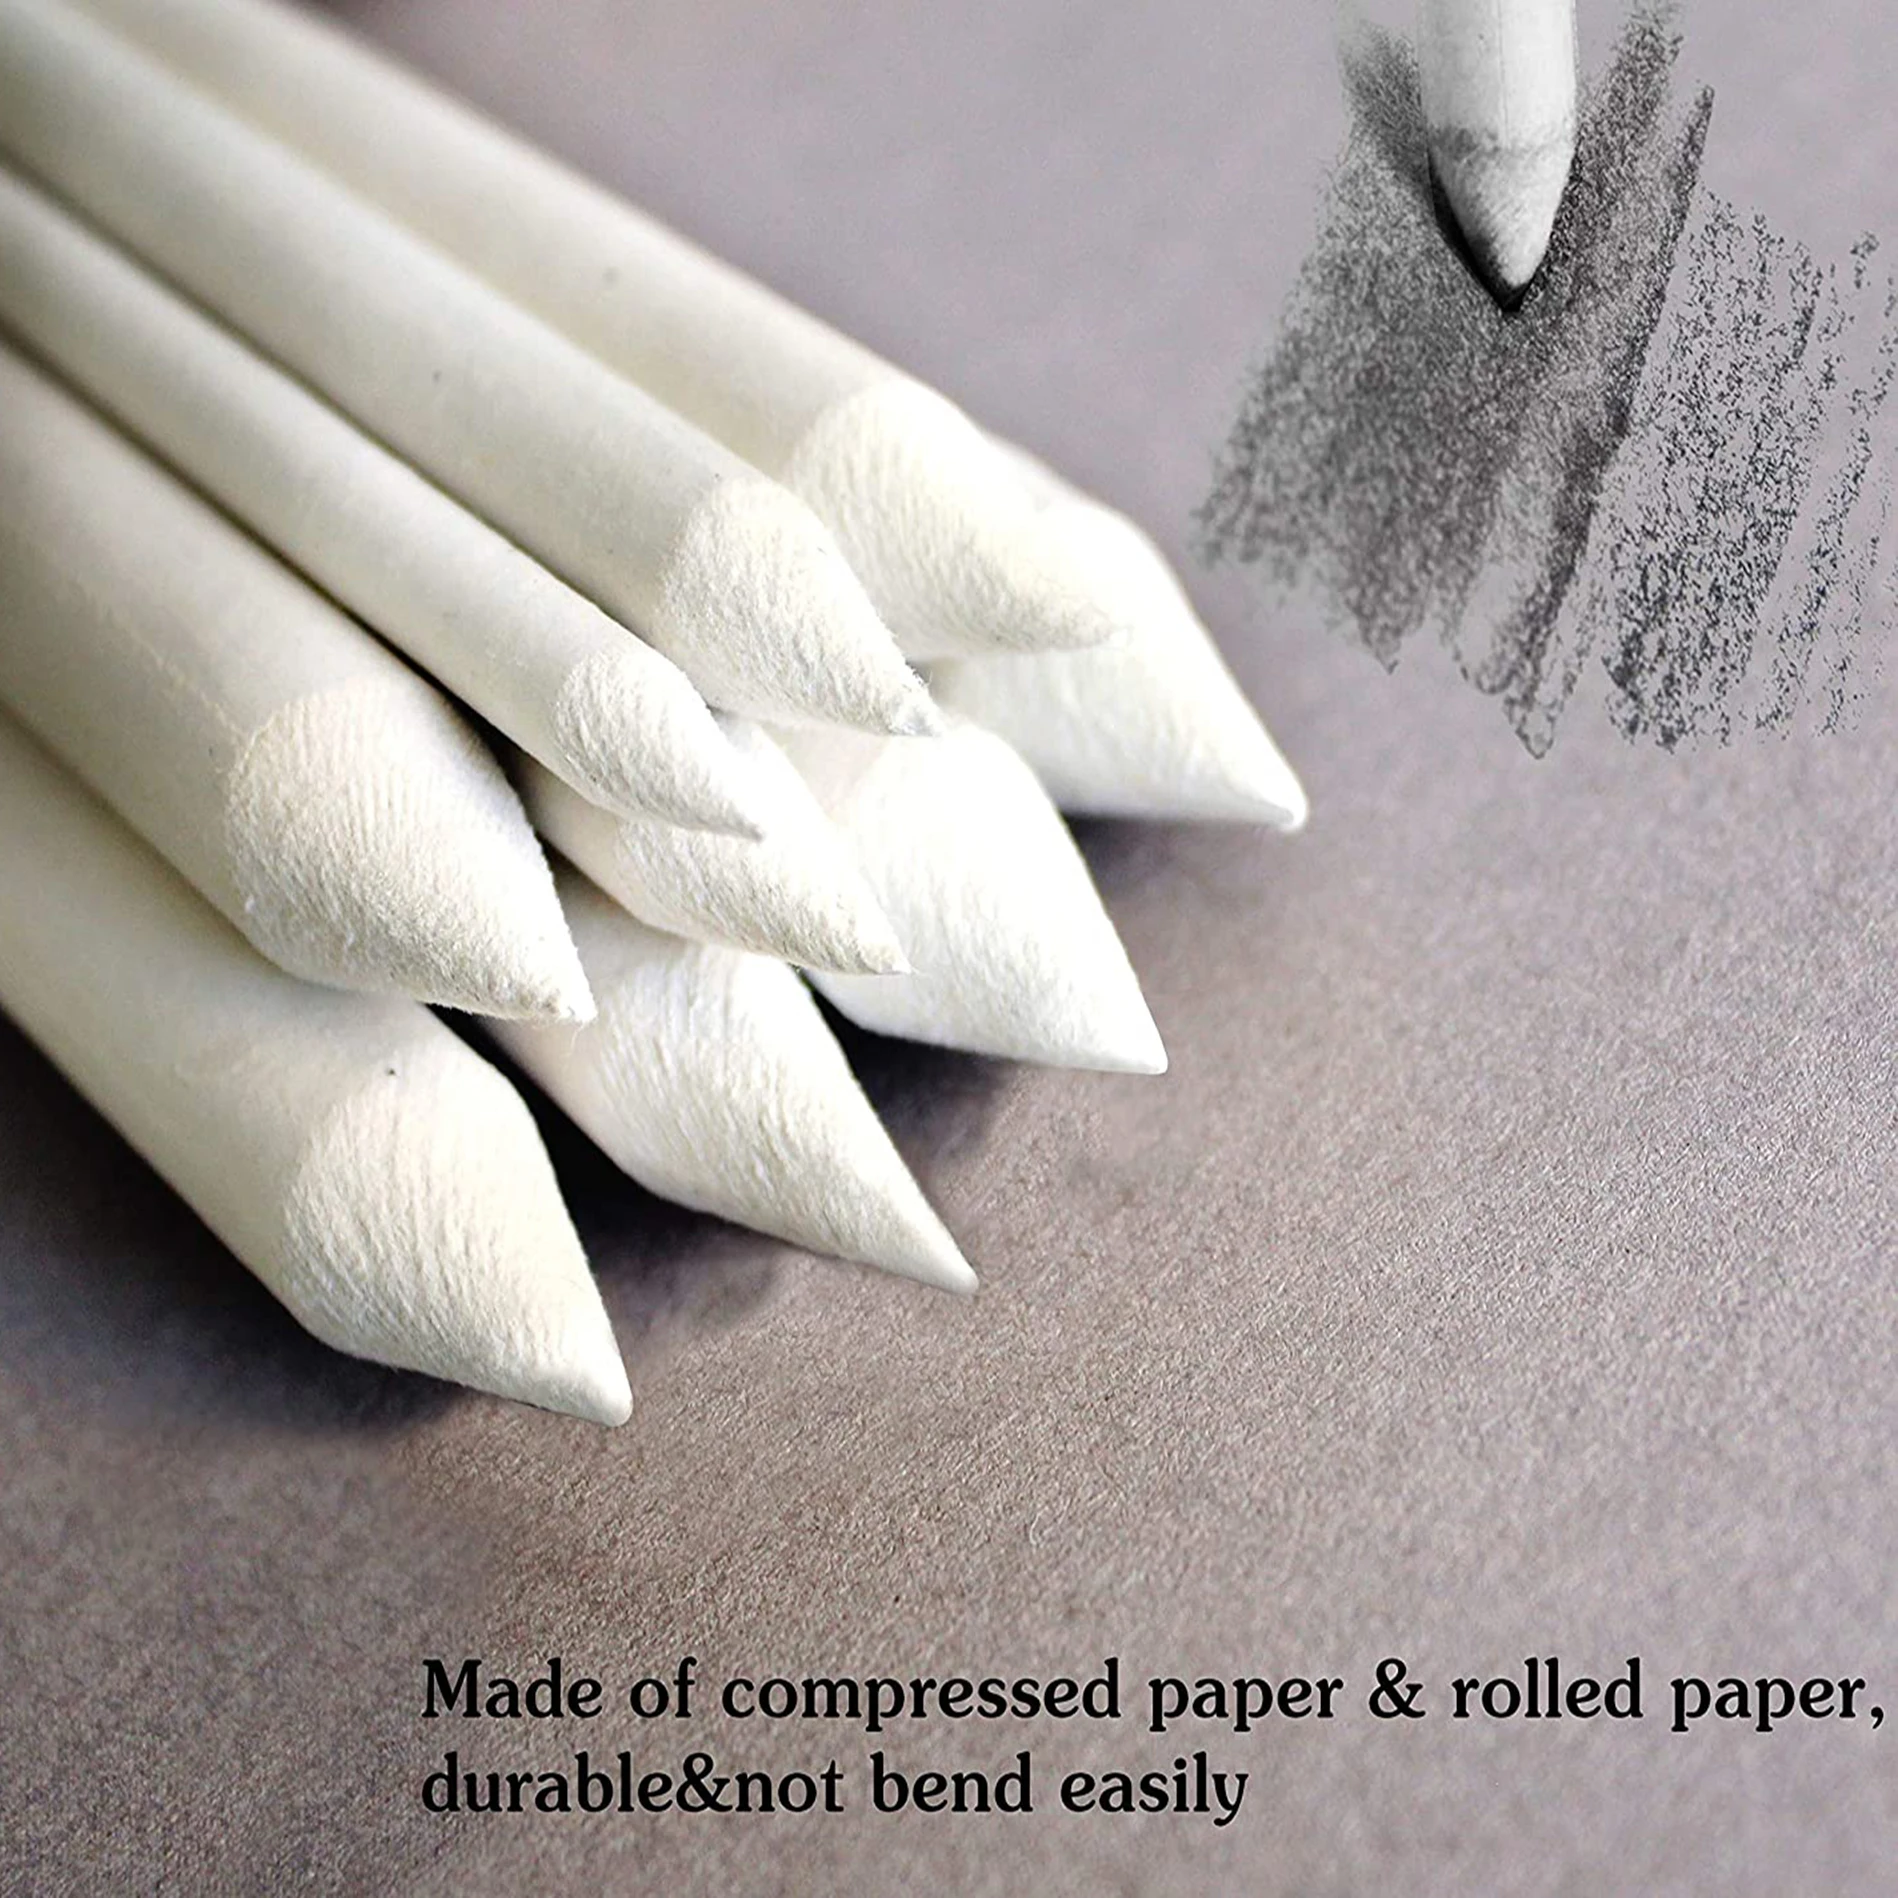 

6pcs Blending Stumps and Tortillions Paper Art Blenders with Sandpaper Pencil for Student Artist Charcoal Sketch Drawing Tools